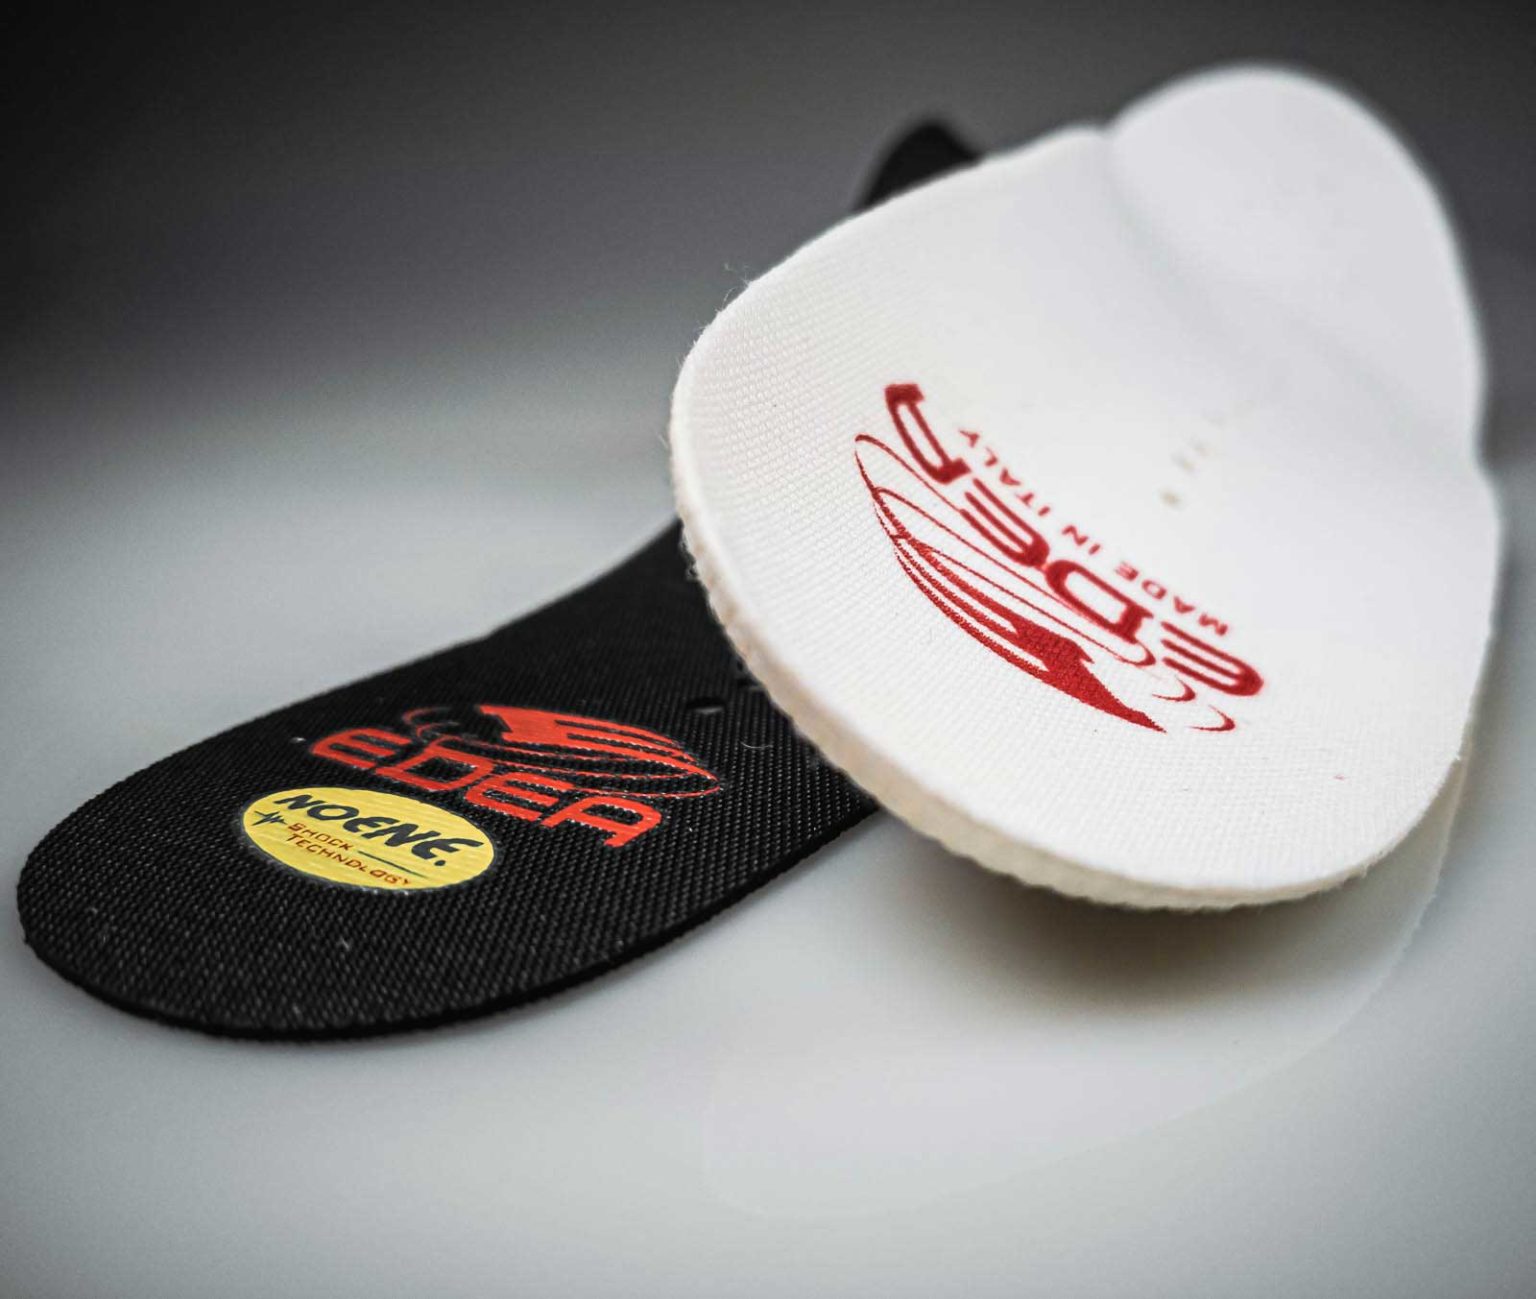 Can be used under any other Edea insoles, even be used in your sneakers.